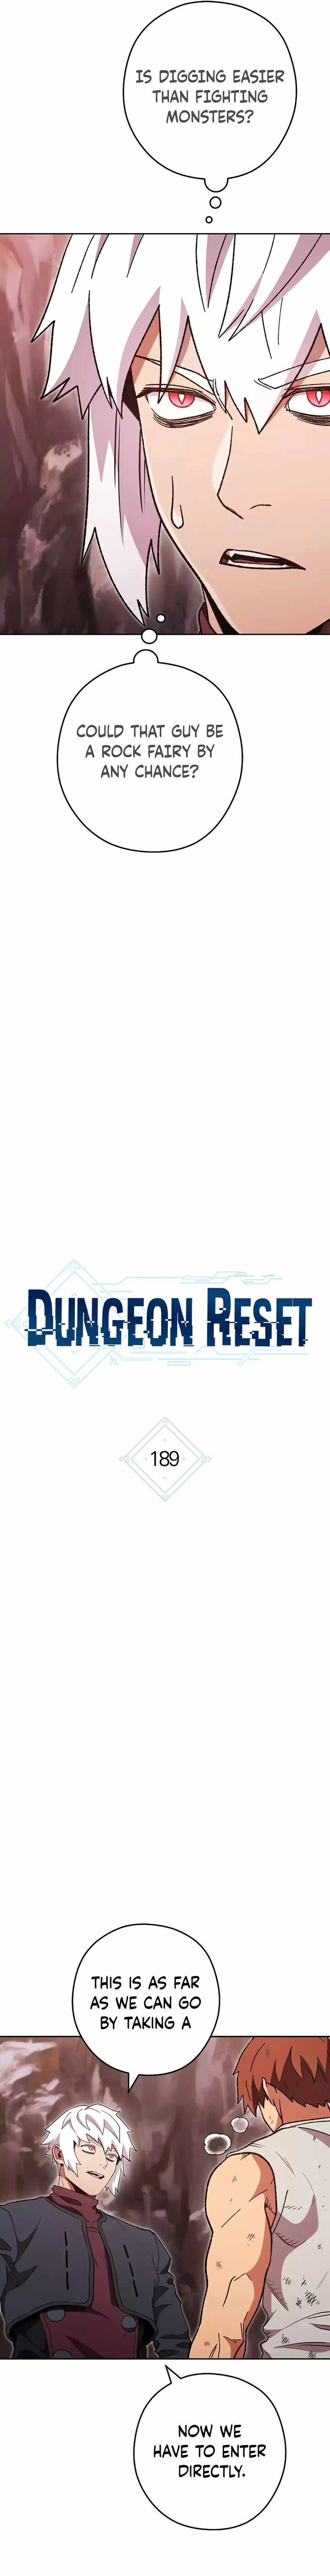 Dungeon Reset Chapter 189 Page 3